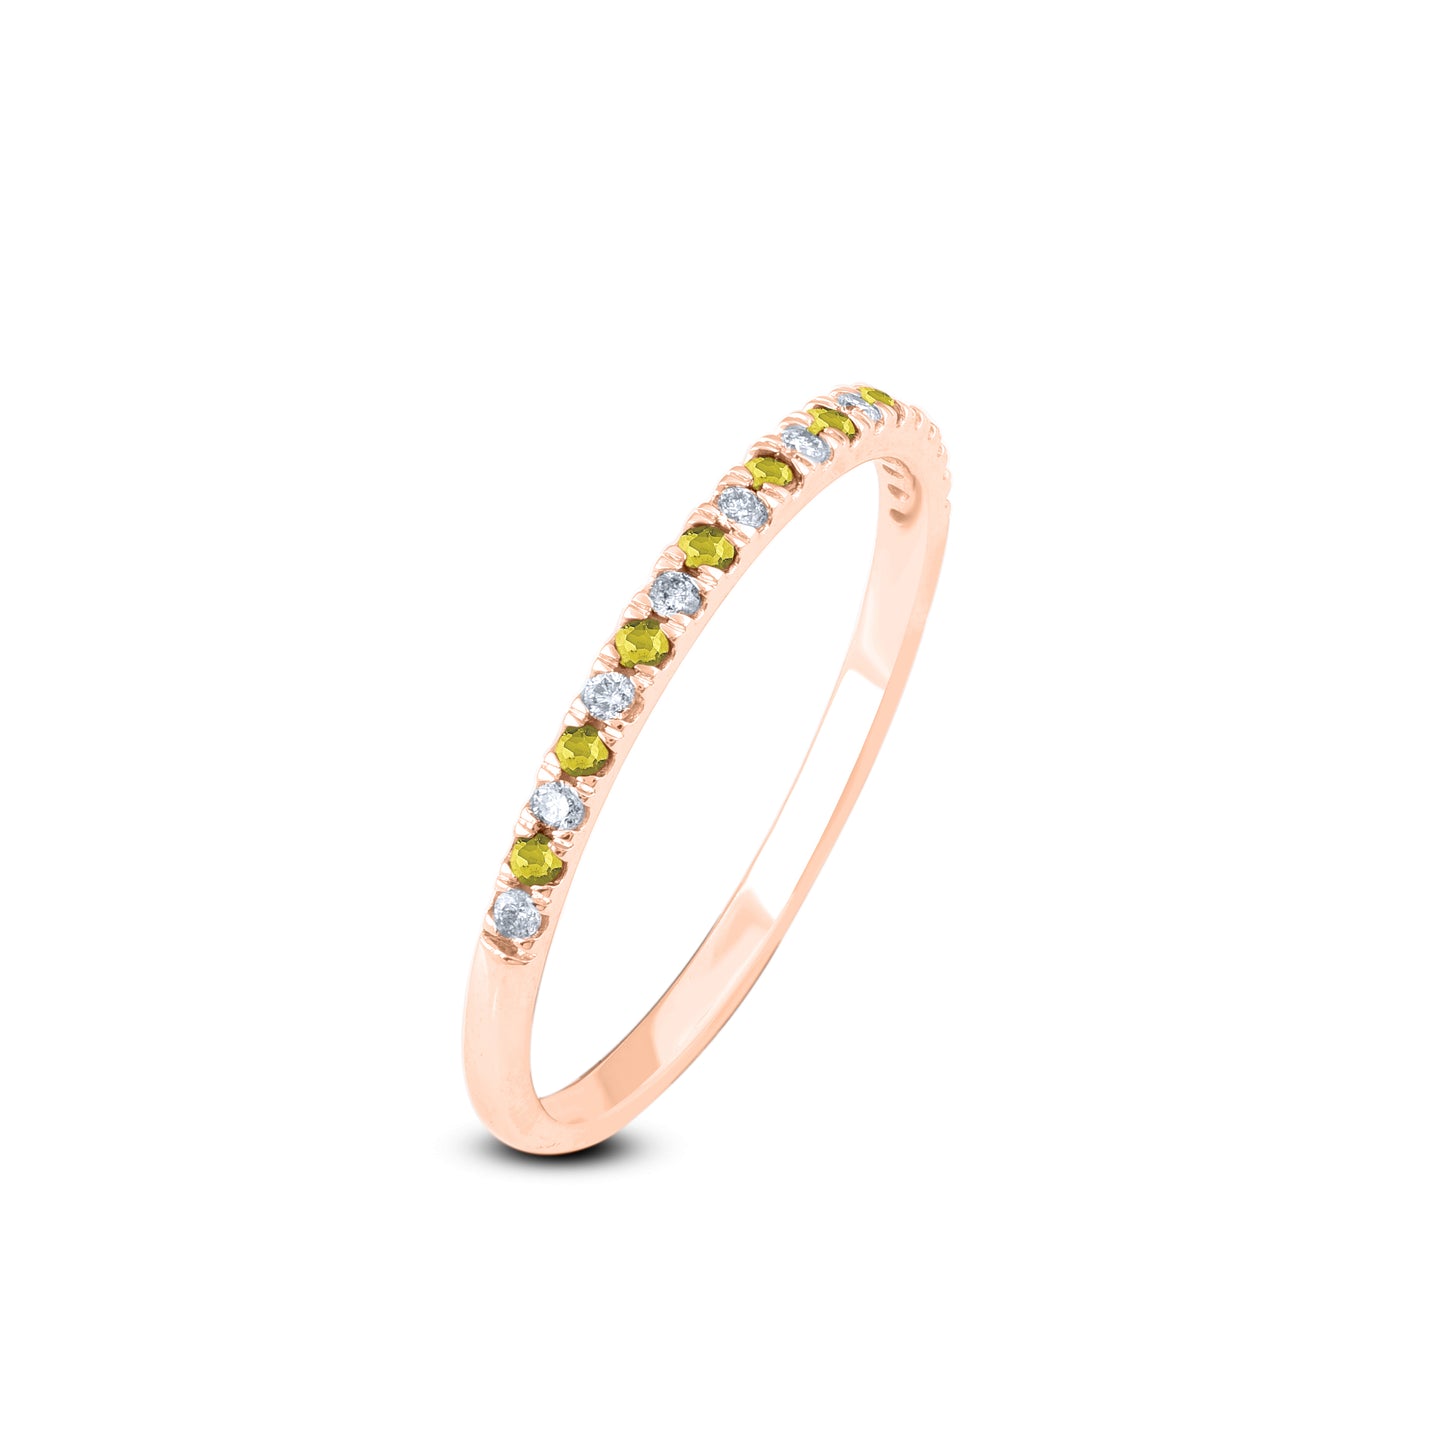 Diamond and Yellow Sapphire Stackable Band Ring in 10K Gold